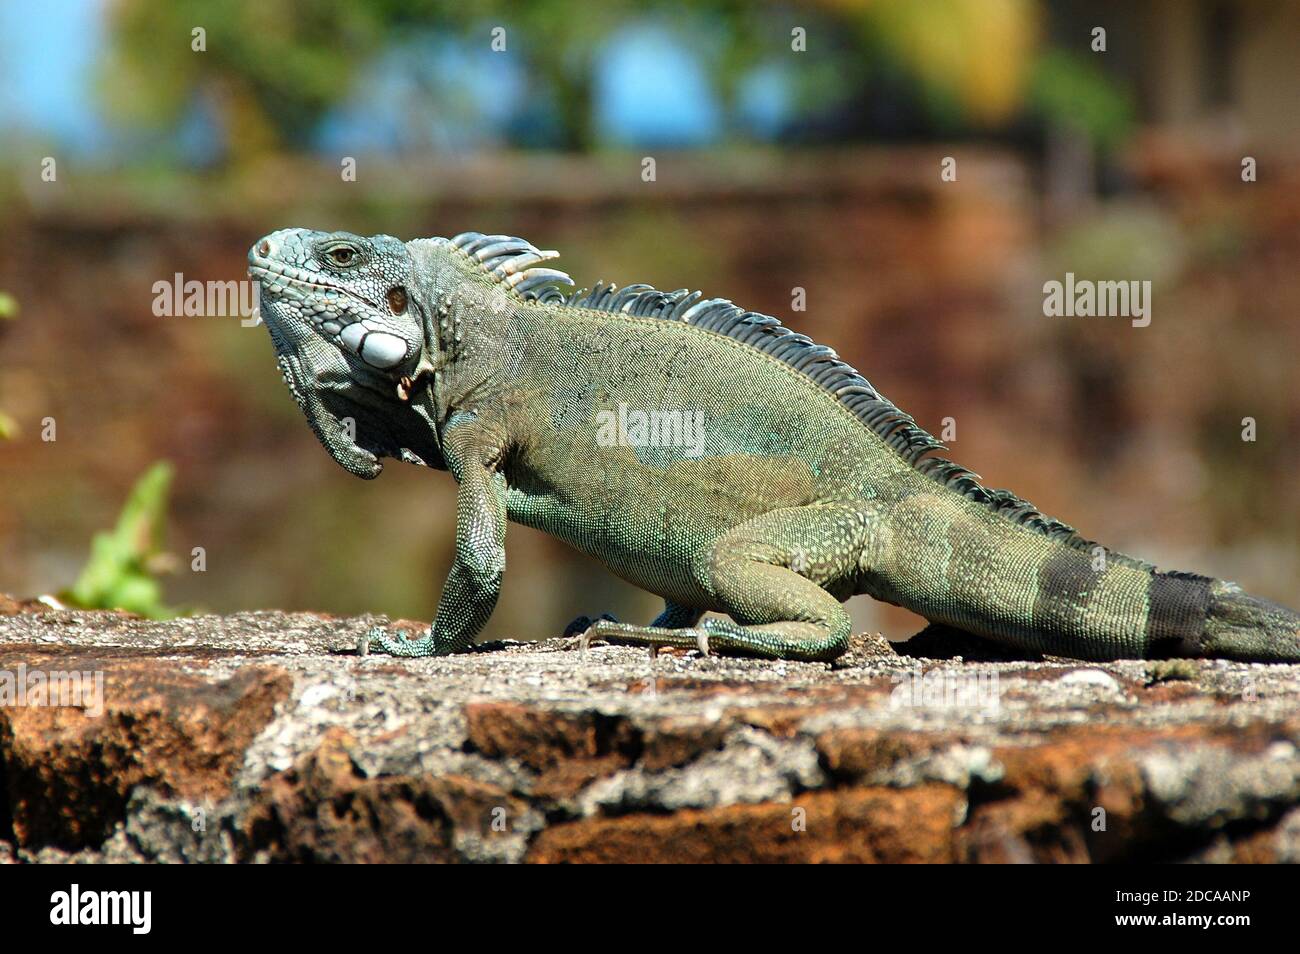 South America, Guyana, Royal island, the green iguana is a large species of arboreal and herbivorous lizard, the adult measures 1.5 meters. Stock Photo